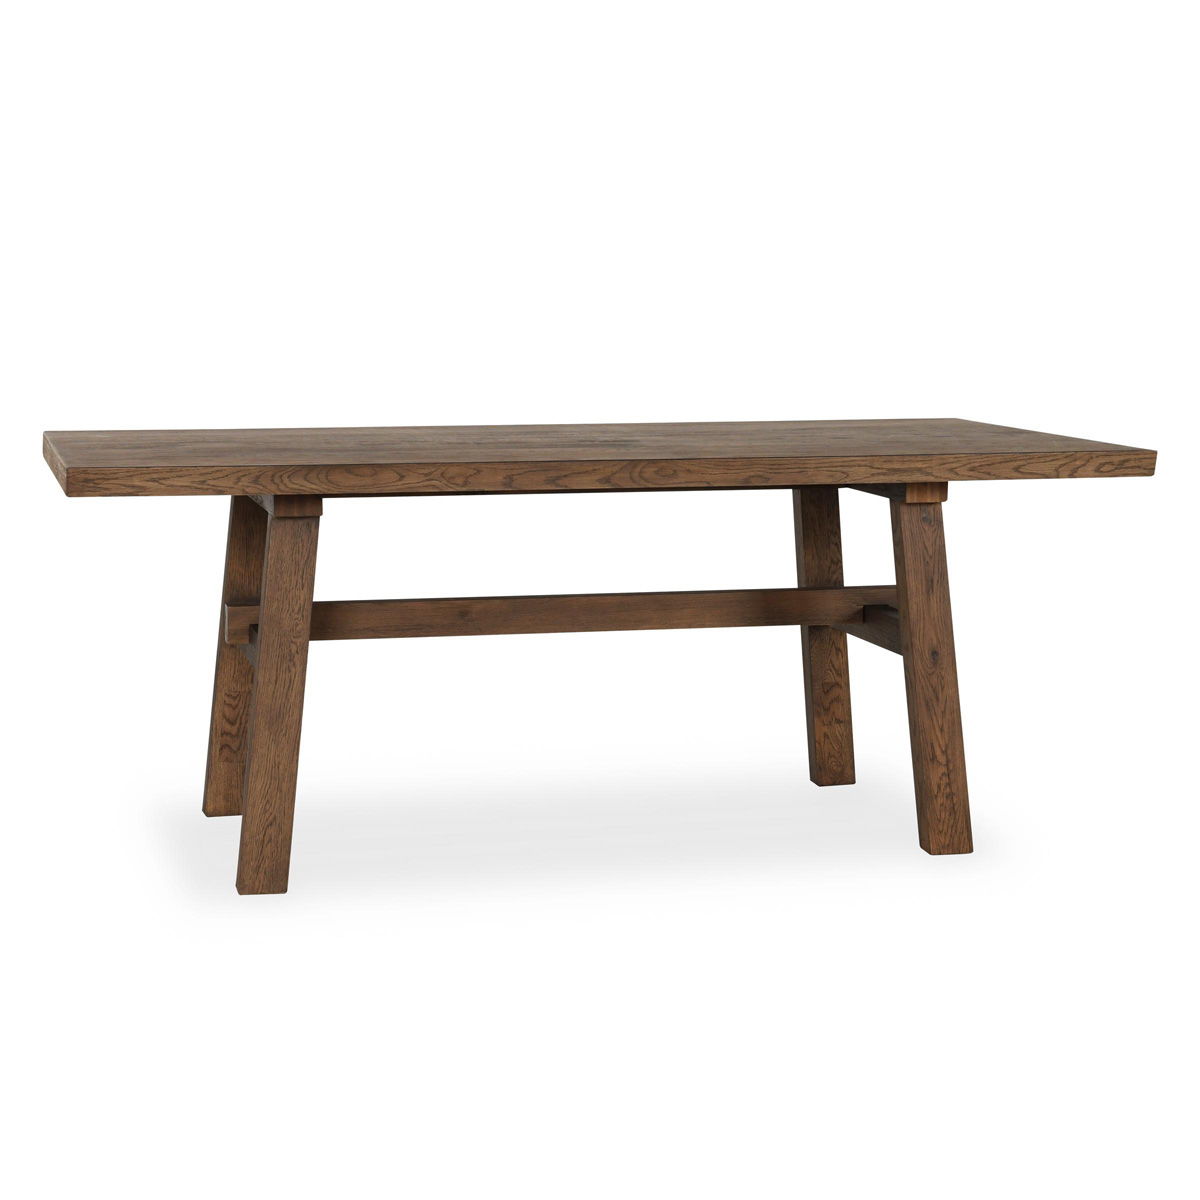 Lazar - Reclaimed Oak Dining Table - Suede Brown